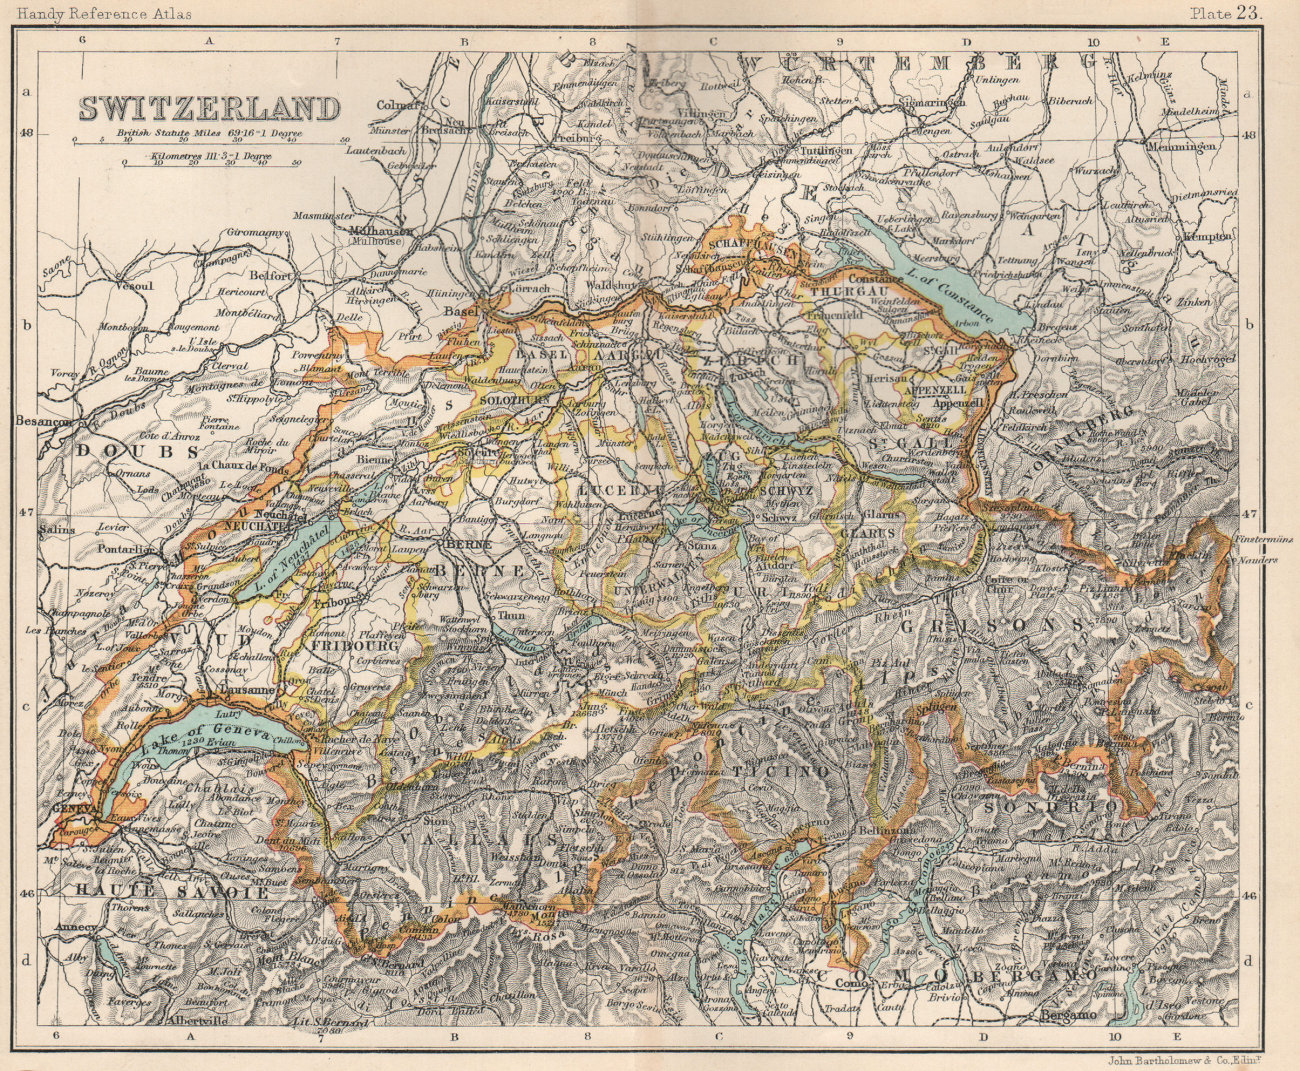 Associate Product Switzerland showing cantons. BARTHOLOMEW 1904 old antique map plan chart